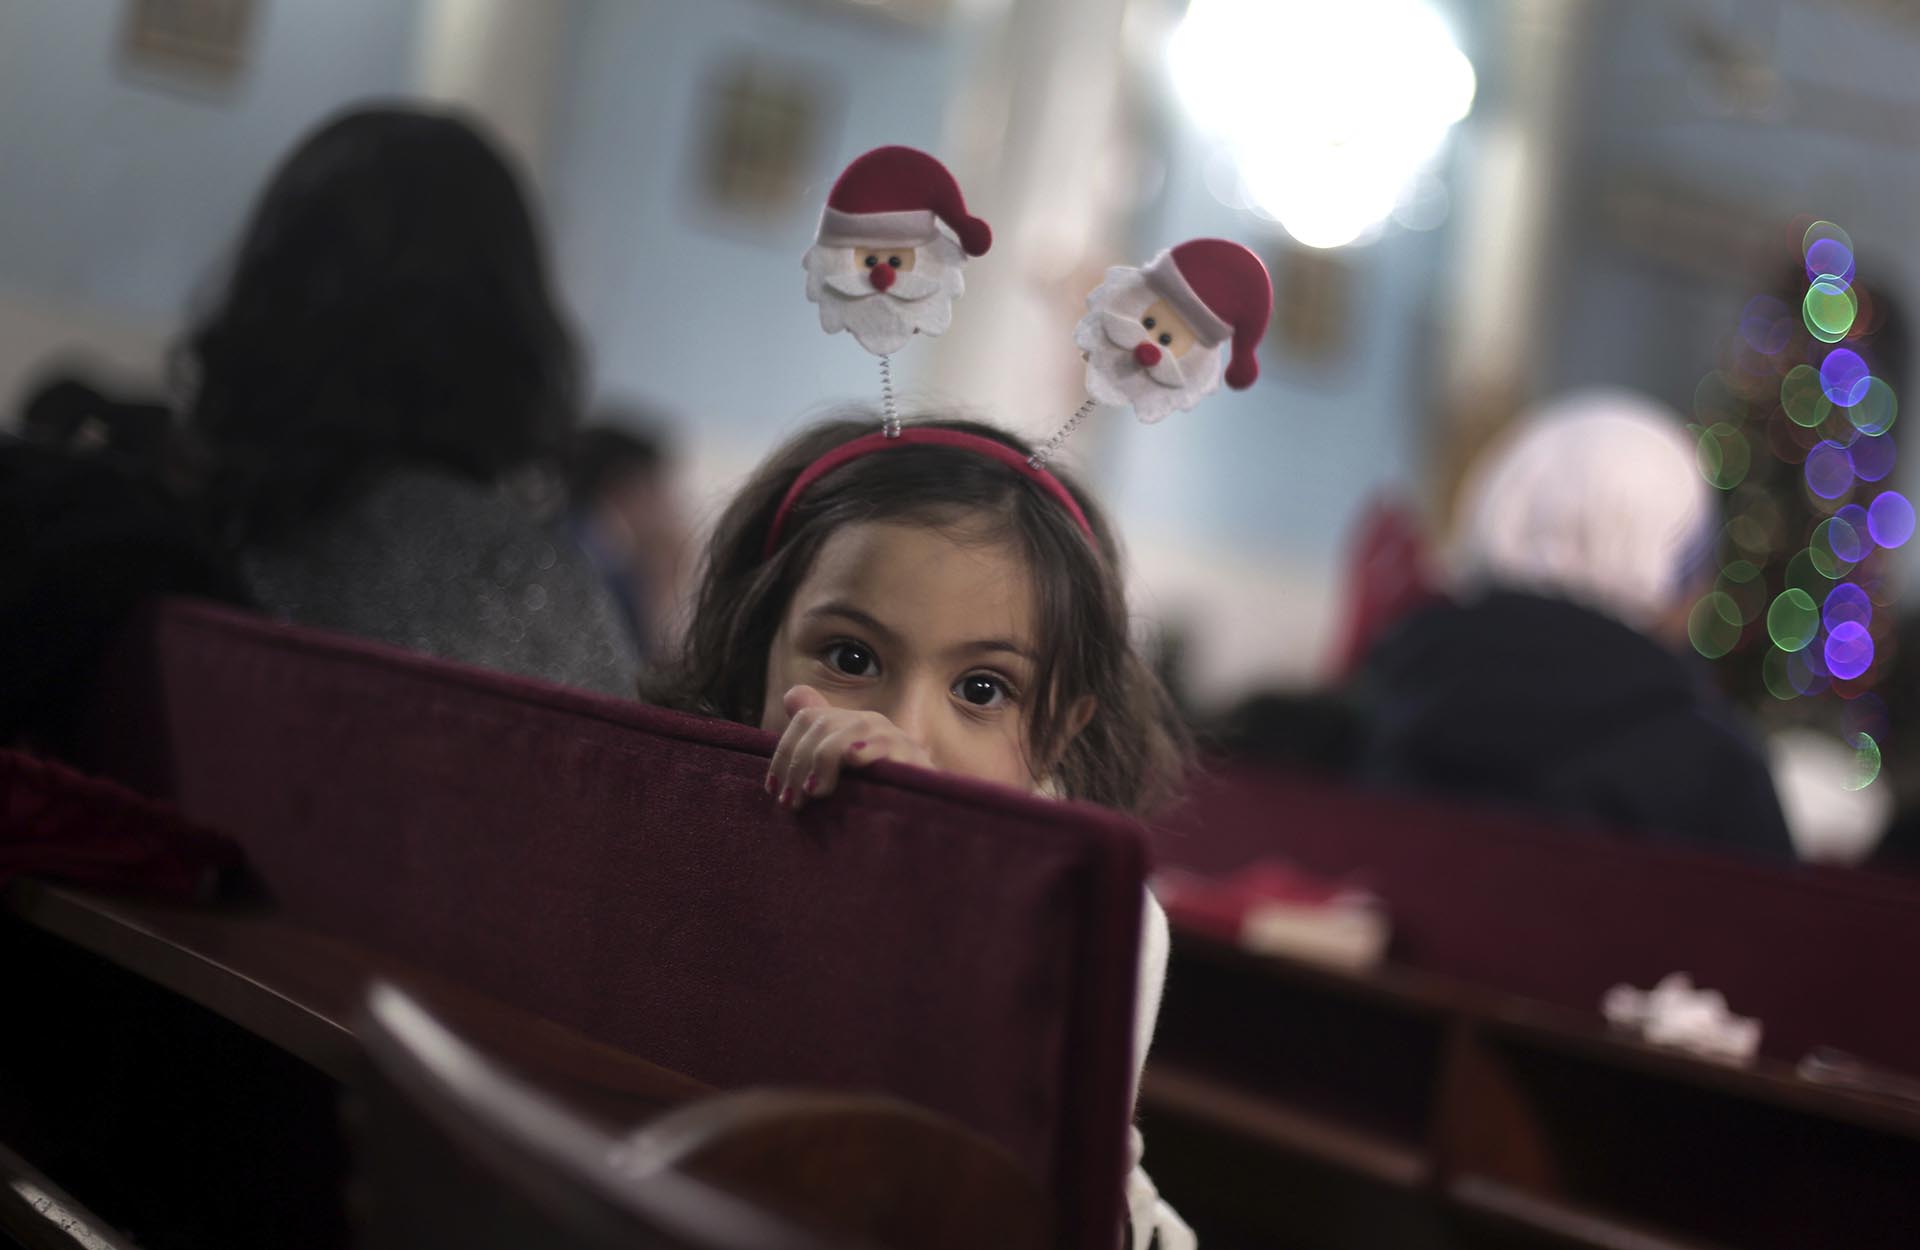 A Palestinian Christian girl attends with her family, the prayers on Christmas Eve at the Holy Family Catholic Church in Gaza City, Saturday, Dec. 24, 2016. (AP Photo/ Khalil Hamra)